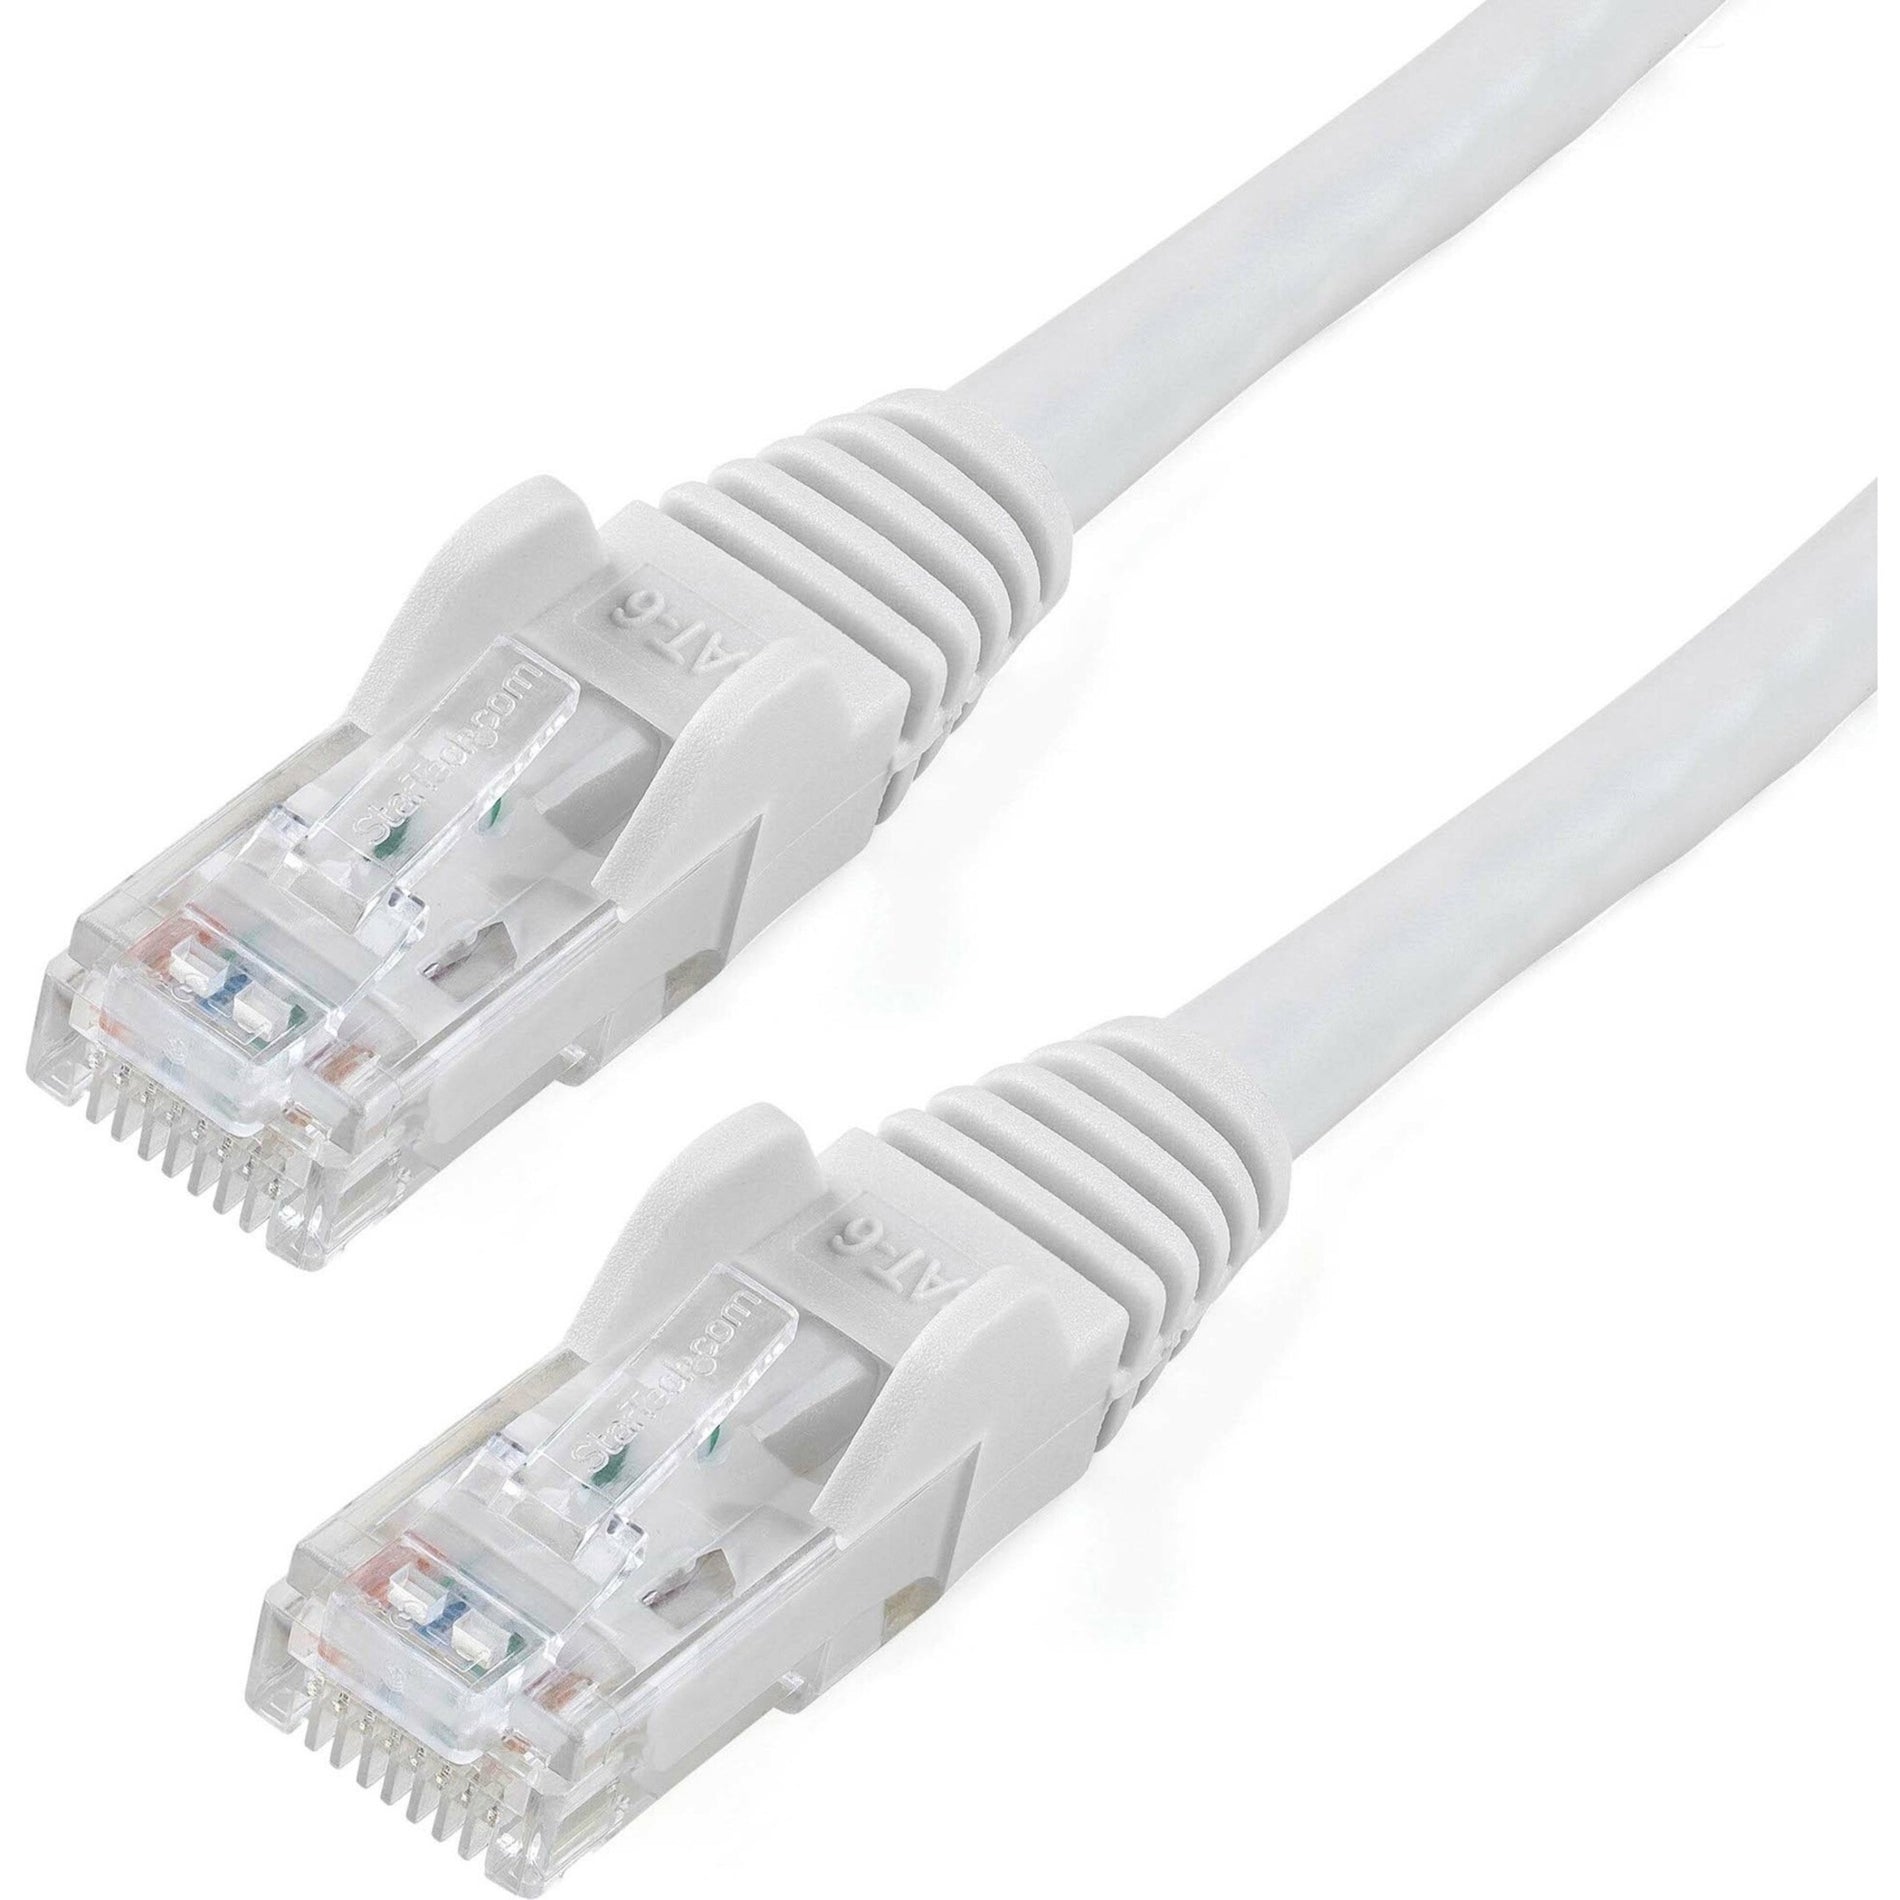 StarTech.com N6PATCH9WH Cat6 Patch Cable, 9 ft White Ethernet Cable with Snagless RJ45 Connectors